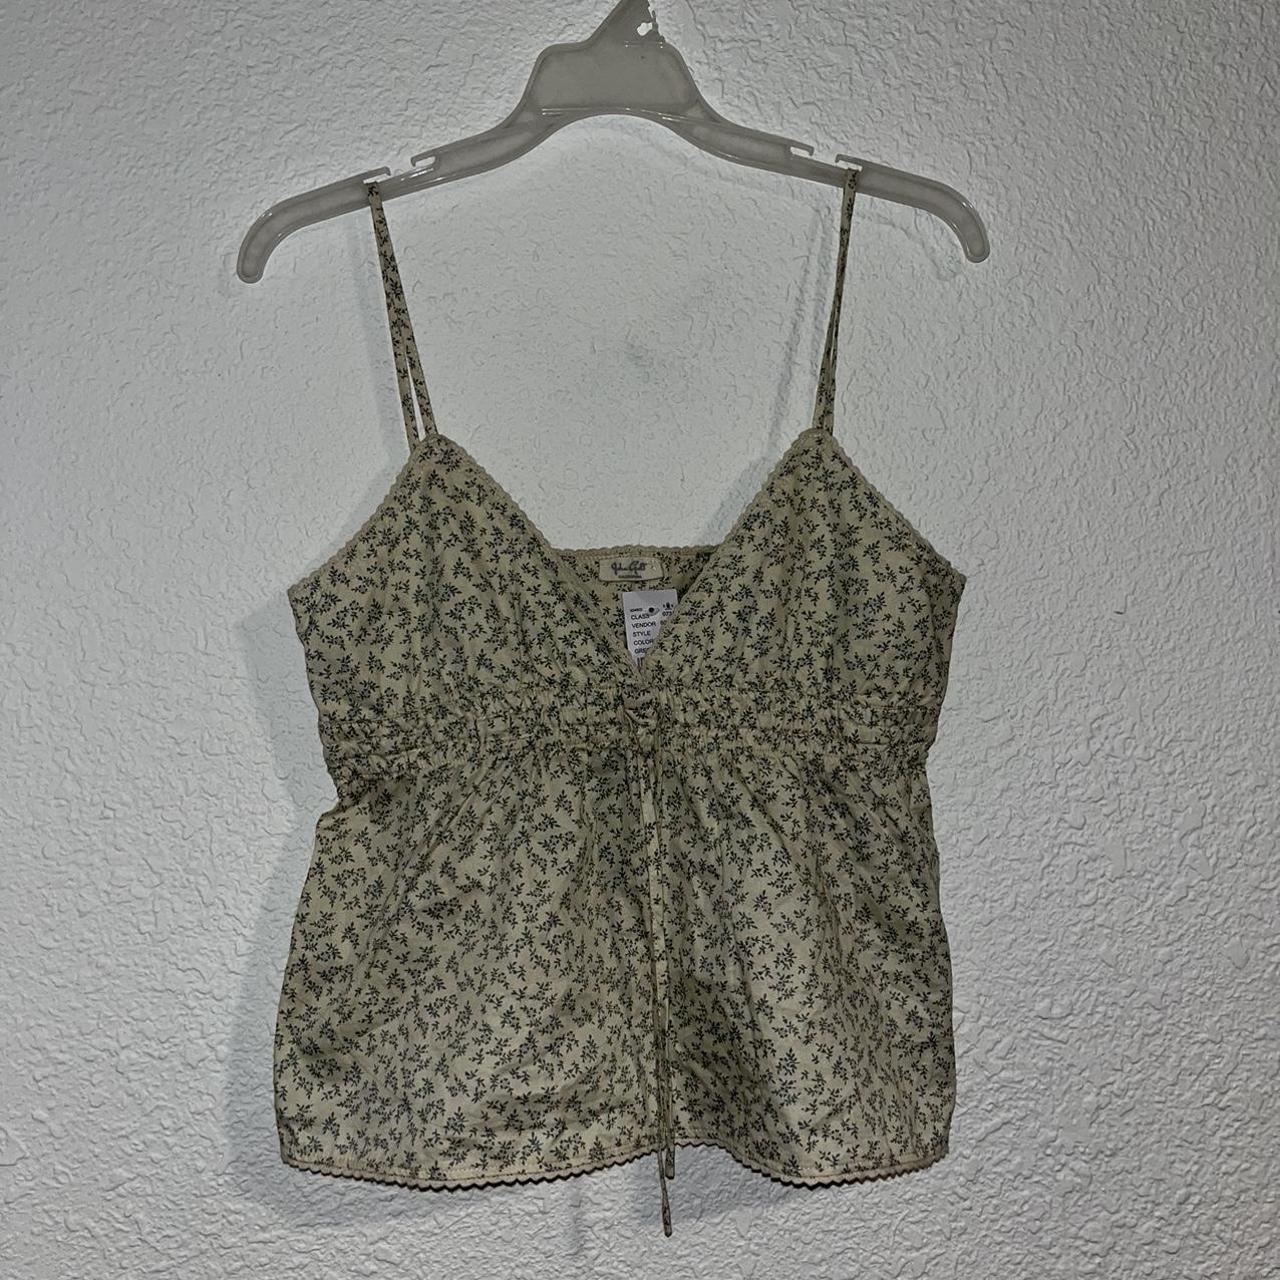 Brandy Melville Top Womens Size S Daisy Print Crop Floral Tank